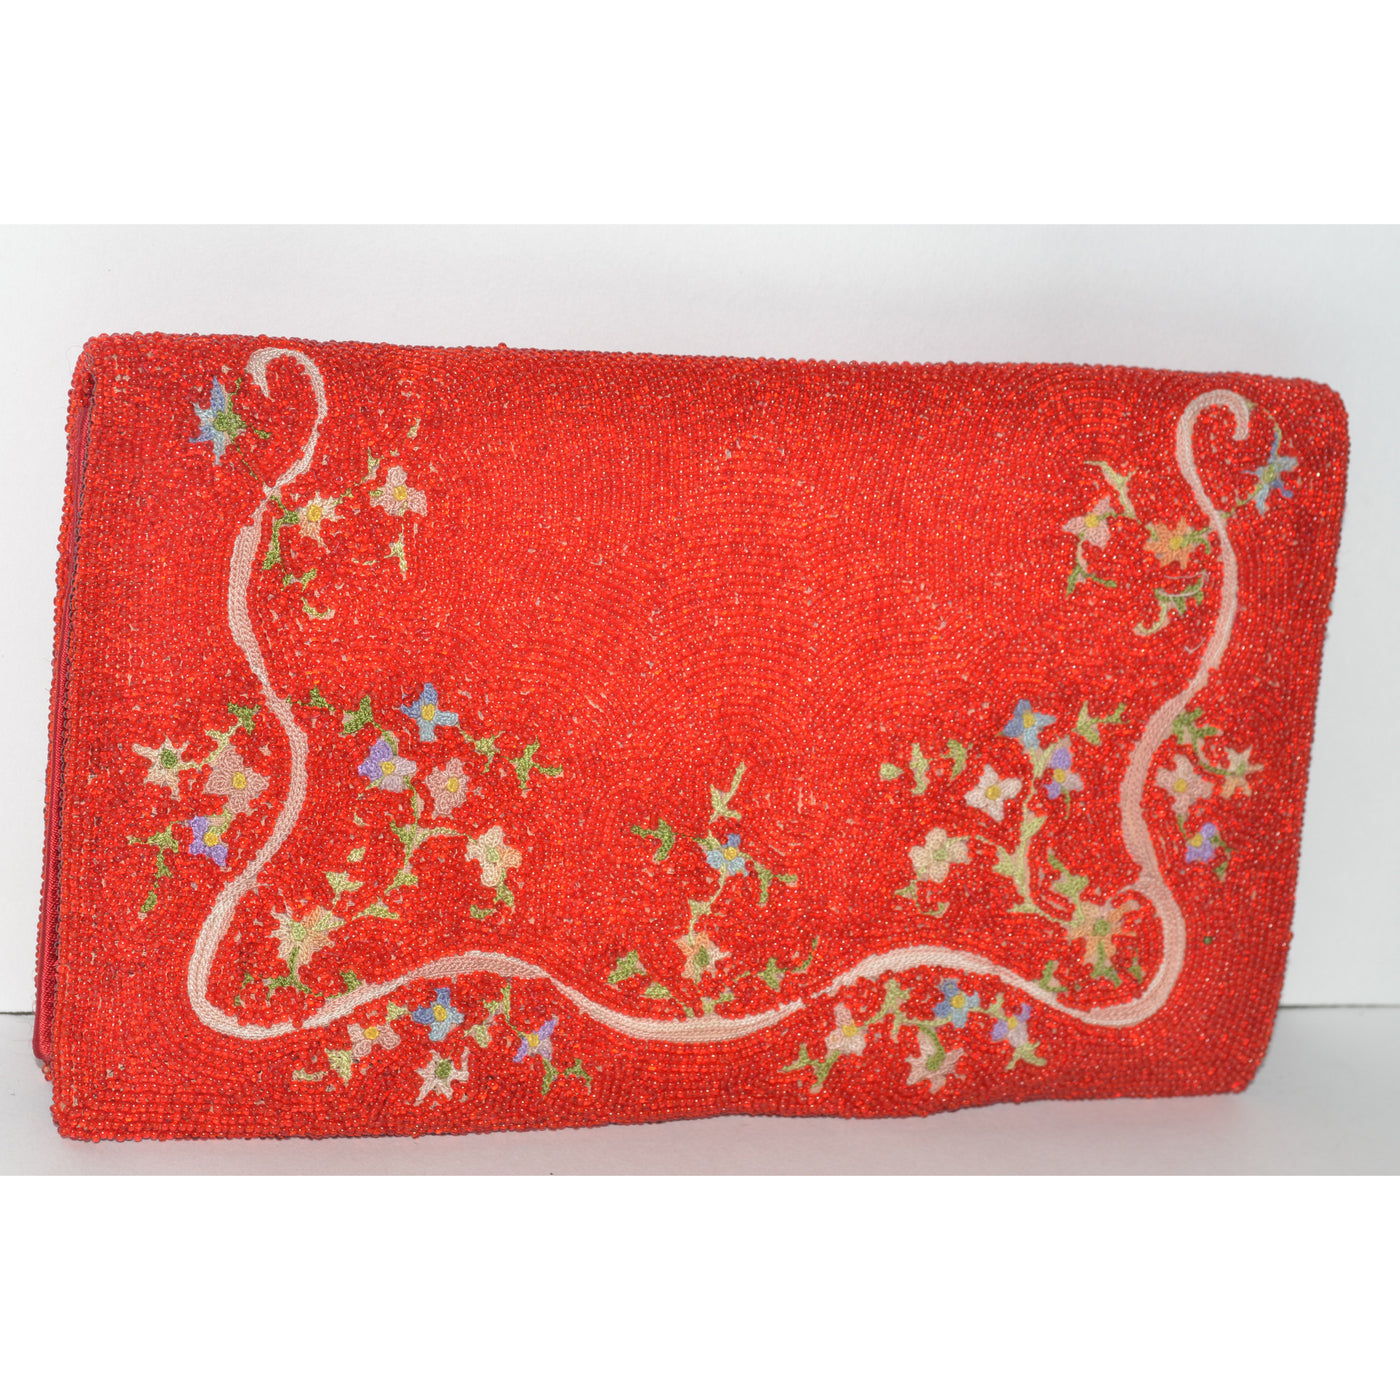 Vintage Red Beaded Embroidered Clutch Purse